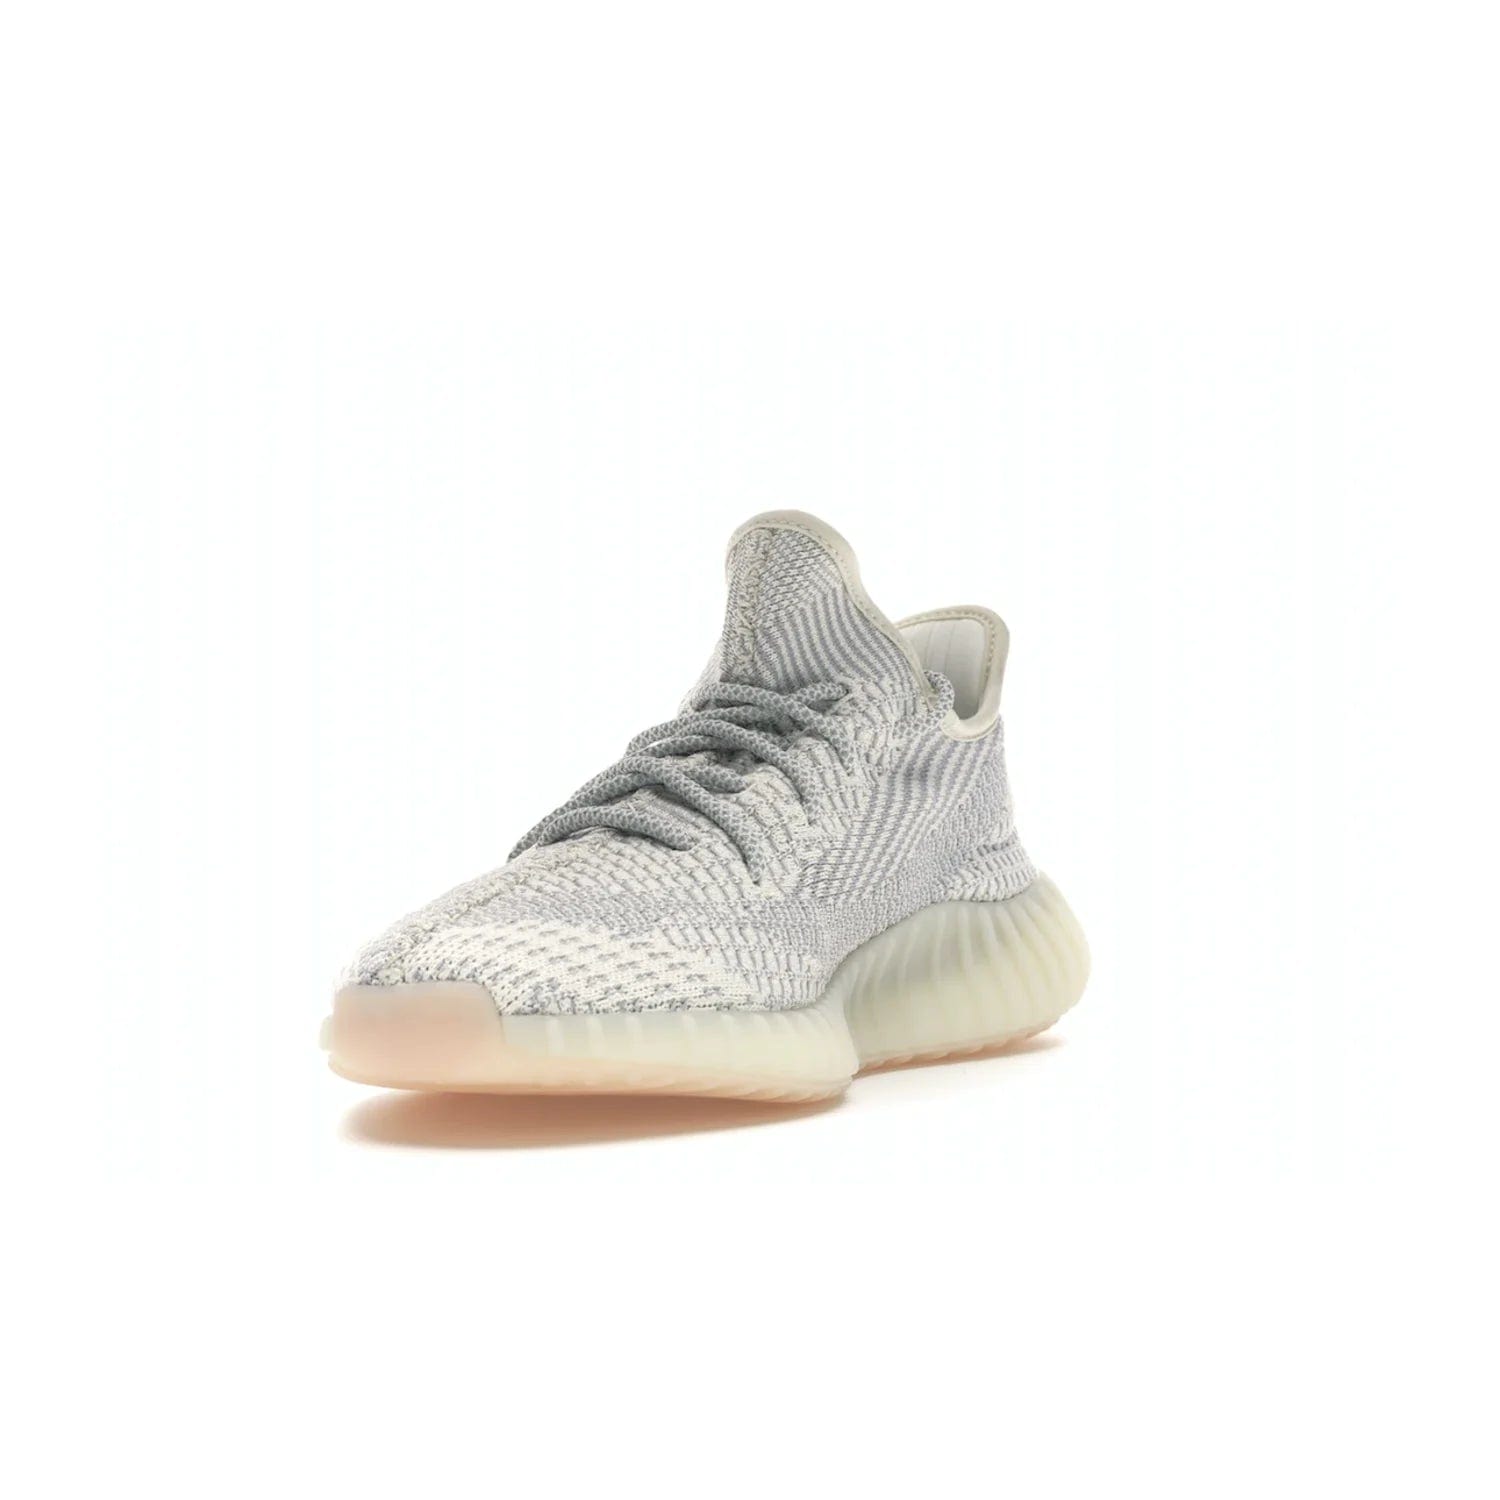 adidas Yeezy Boost 350 V2 Lundmark (Non Reflective) - Image 13 - Only at www.BallersClubKickz.com - Shop the exclusive adidas Yeezy Boost 350 V2 Lundmark with a subtle summer color, mesh upper, white-to-cream transitional midsole, light tan outsole, and pink middle stripe. Comfort and style come together in this perfect summer 350 V2. Released on July 11, 2019.